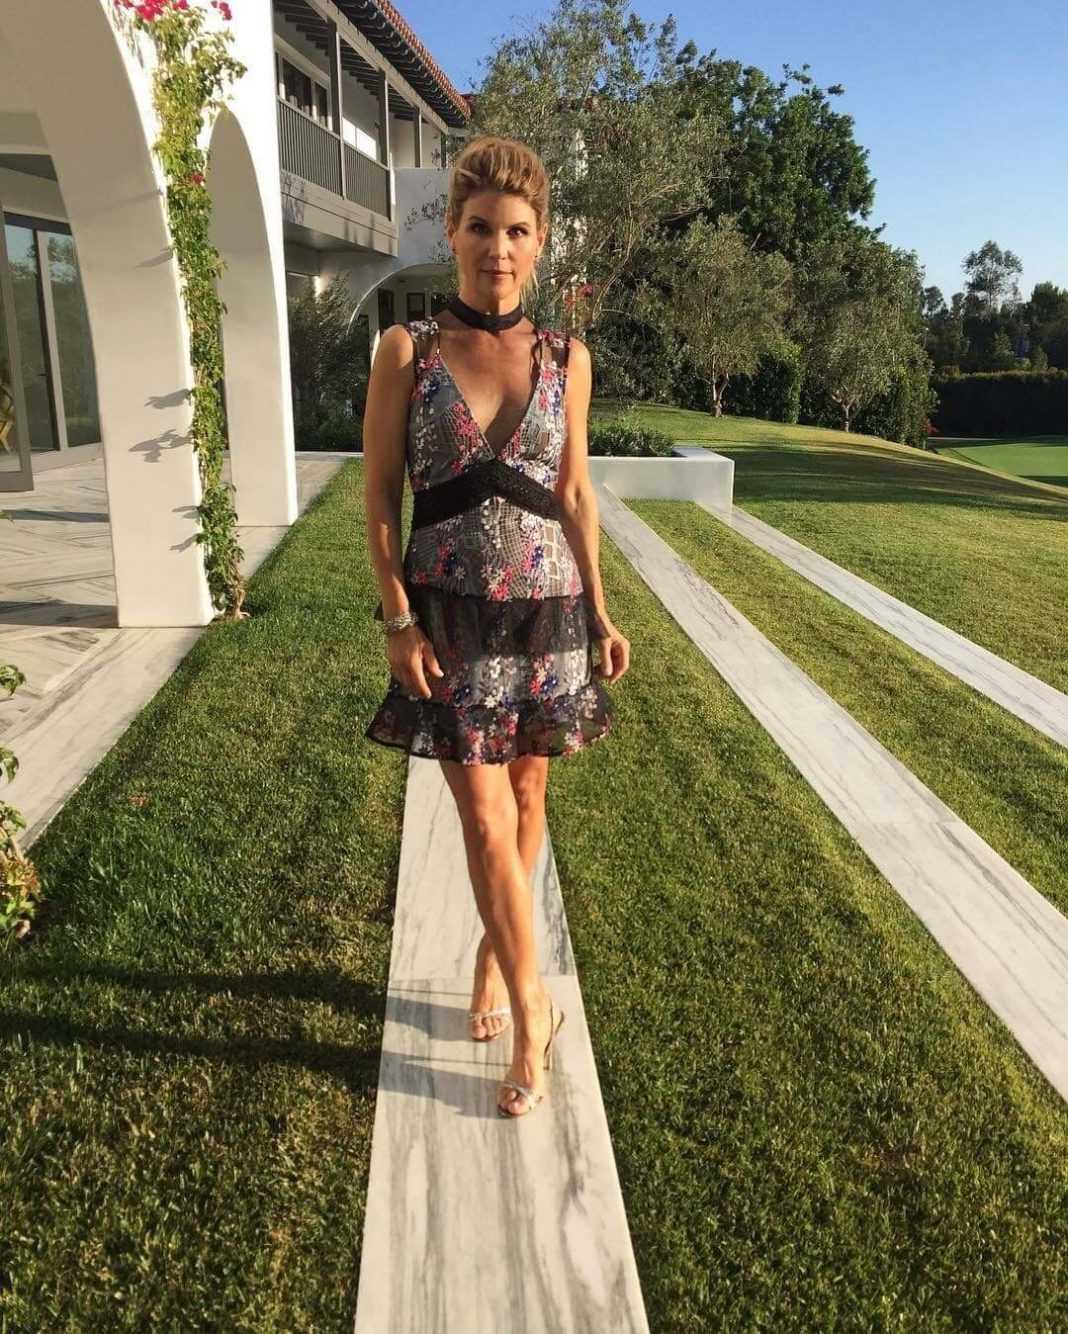 48 Lori Loughlin Nude Pictures Flaunt Her Immaculate Figure | Best Of Comic Books